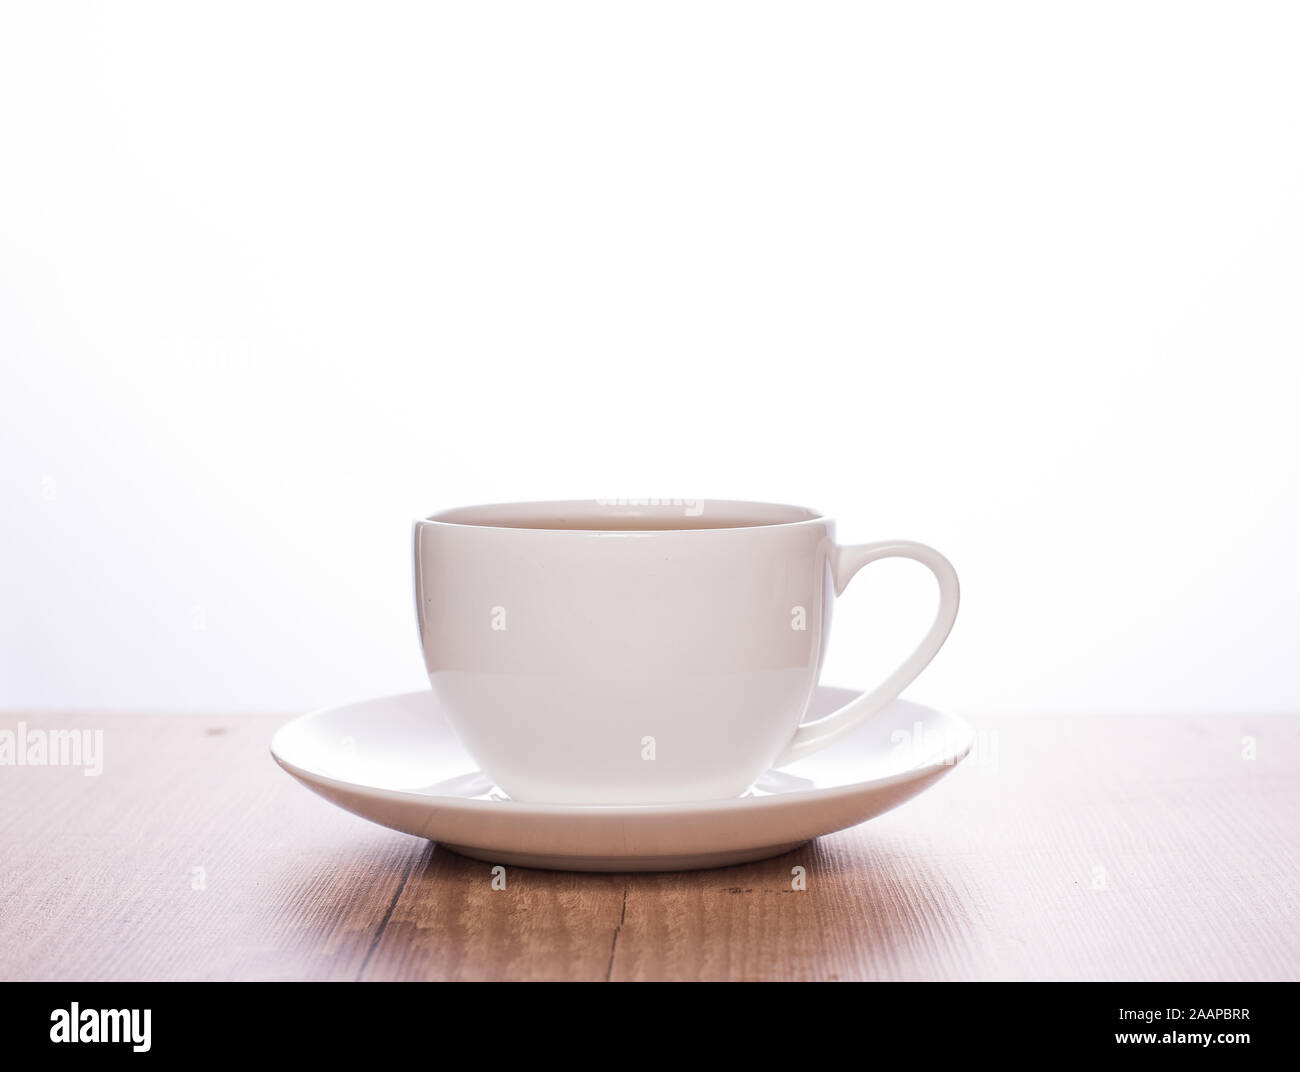 Plain white cup on a wooden table and white background (coffee, tea, espresso) Stock Photo